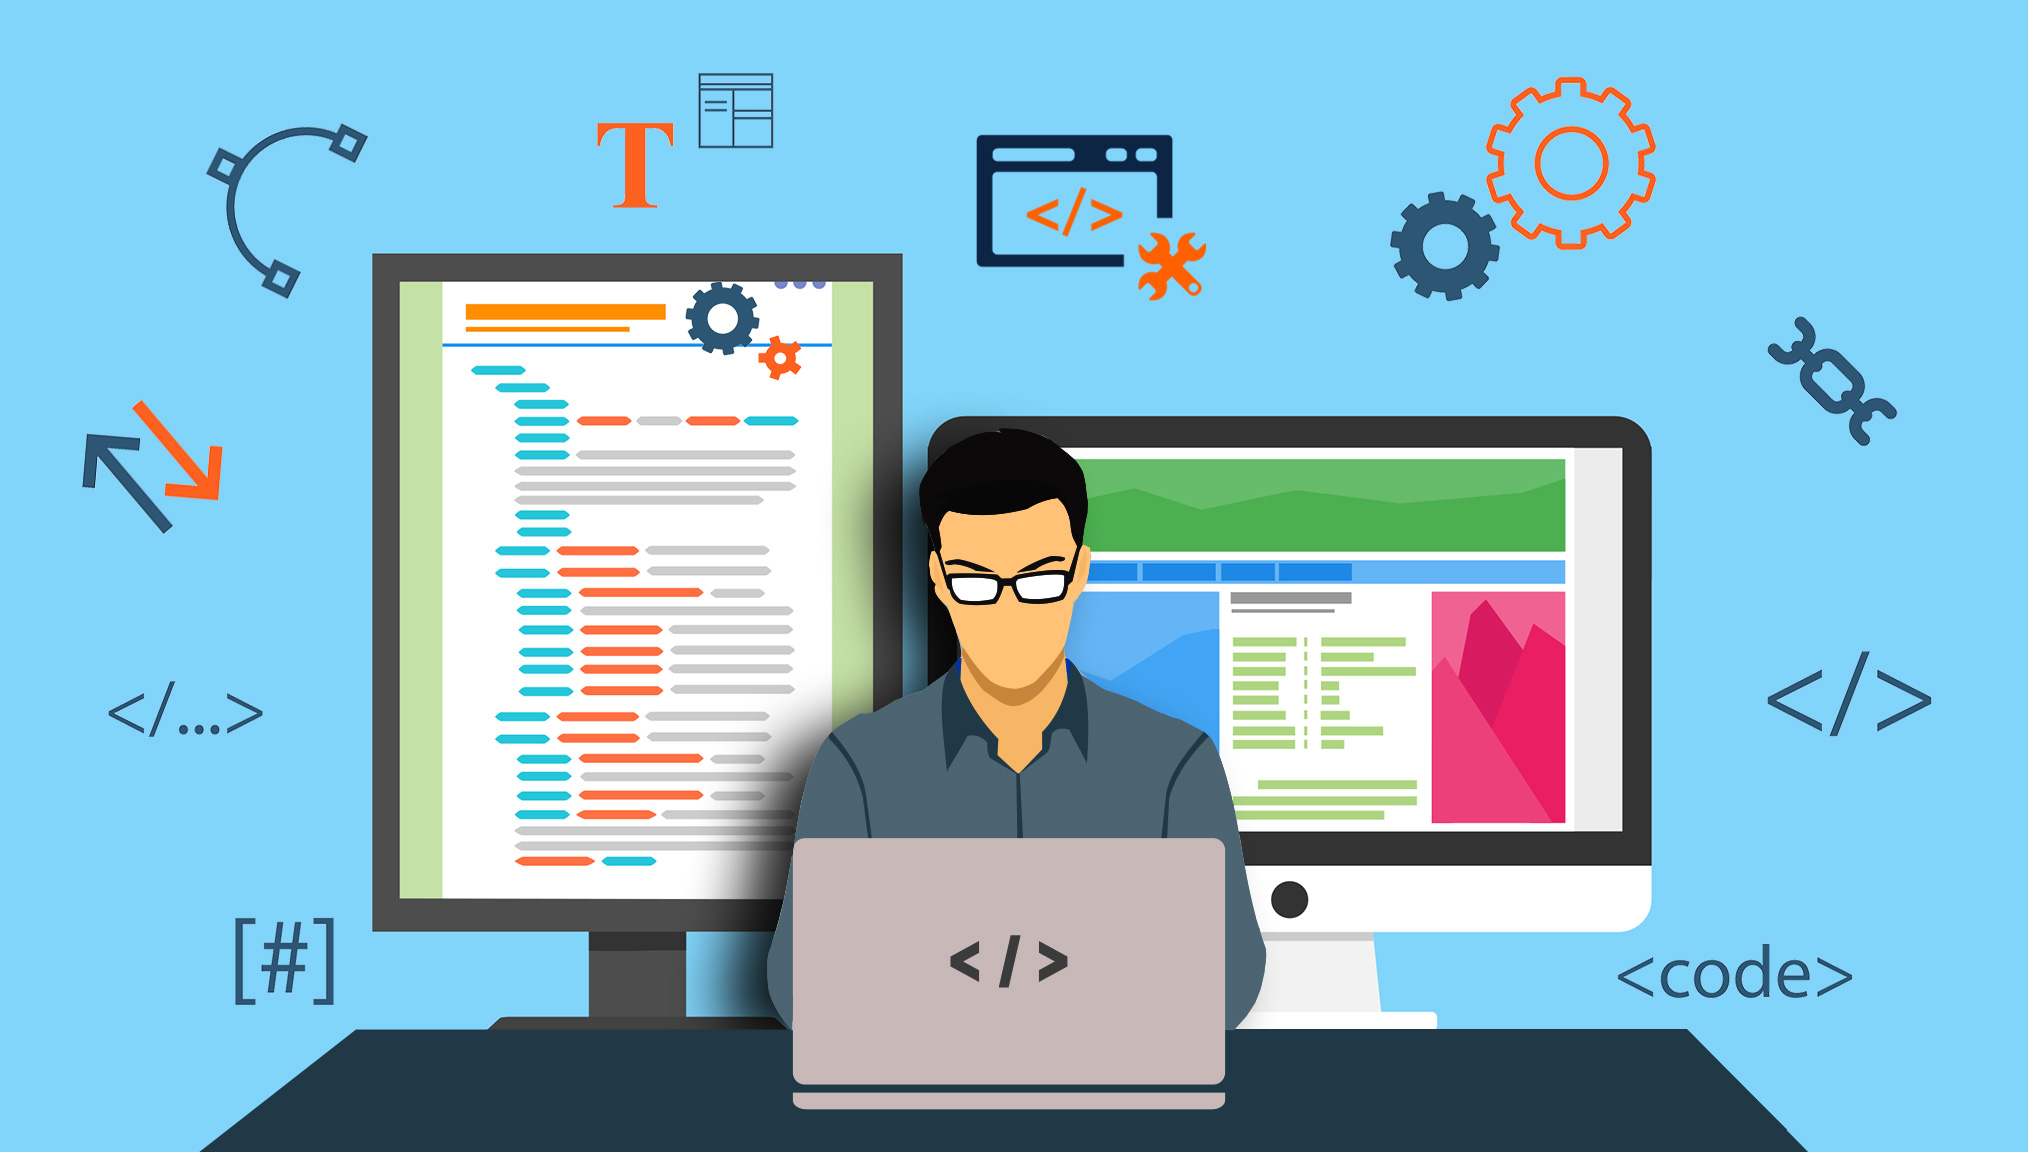 What are the top three industries that employ web developers